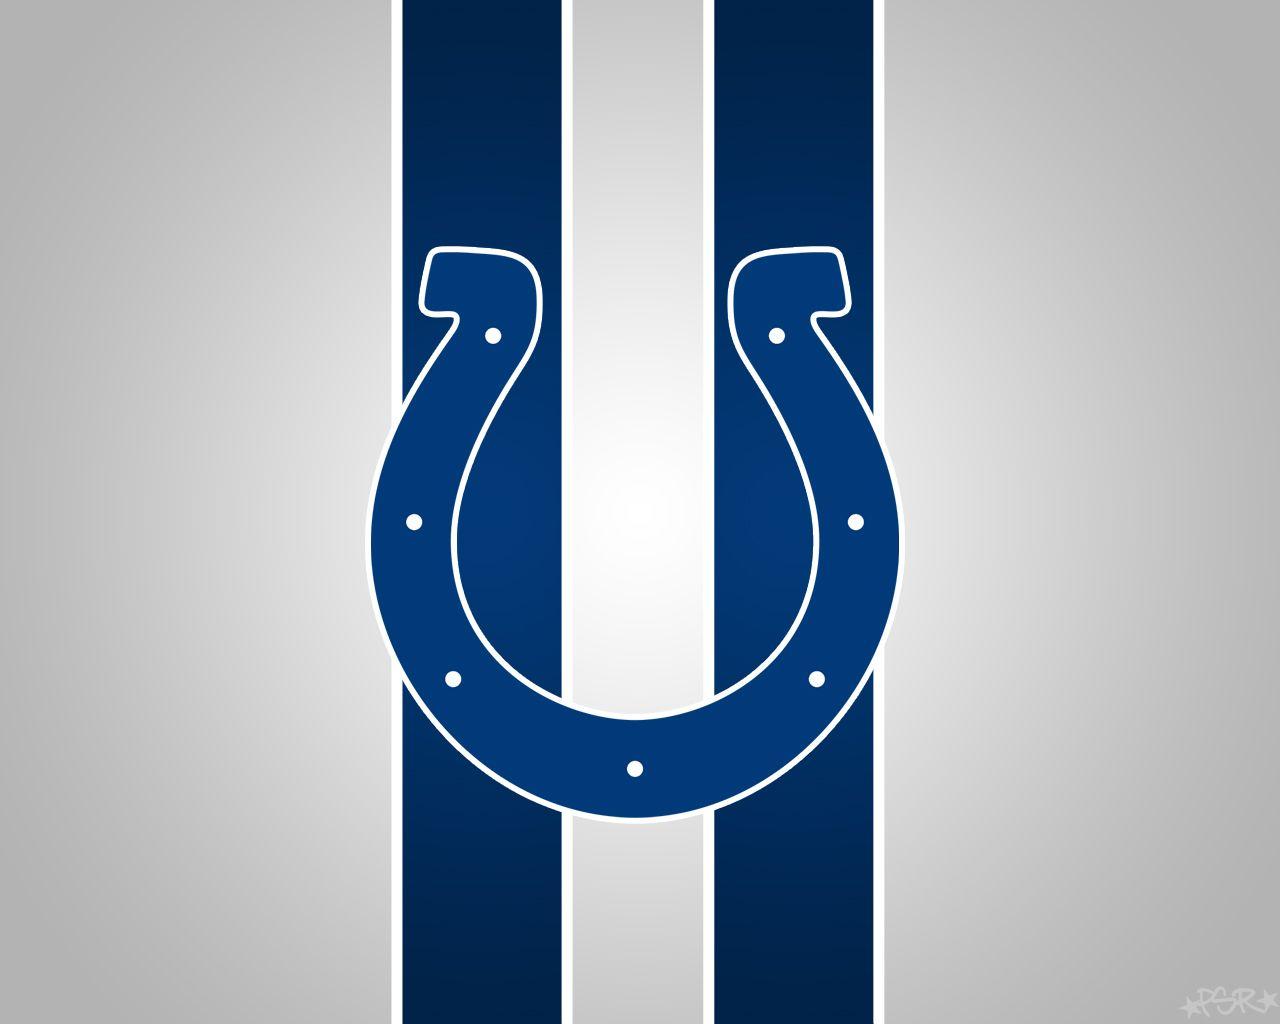 Indianapolis Colts Wallpaper and Background Imagex1024